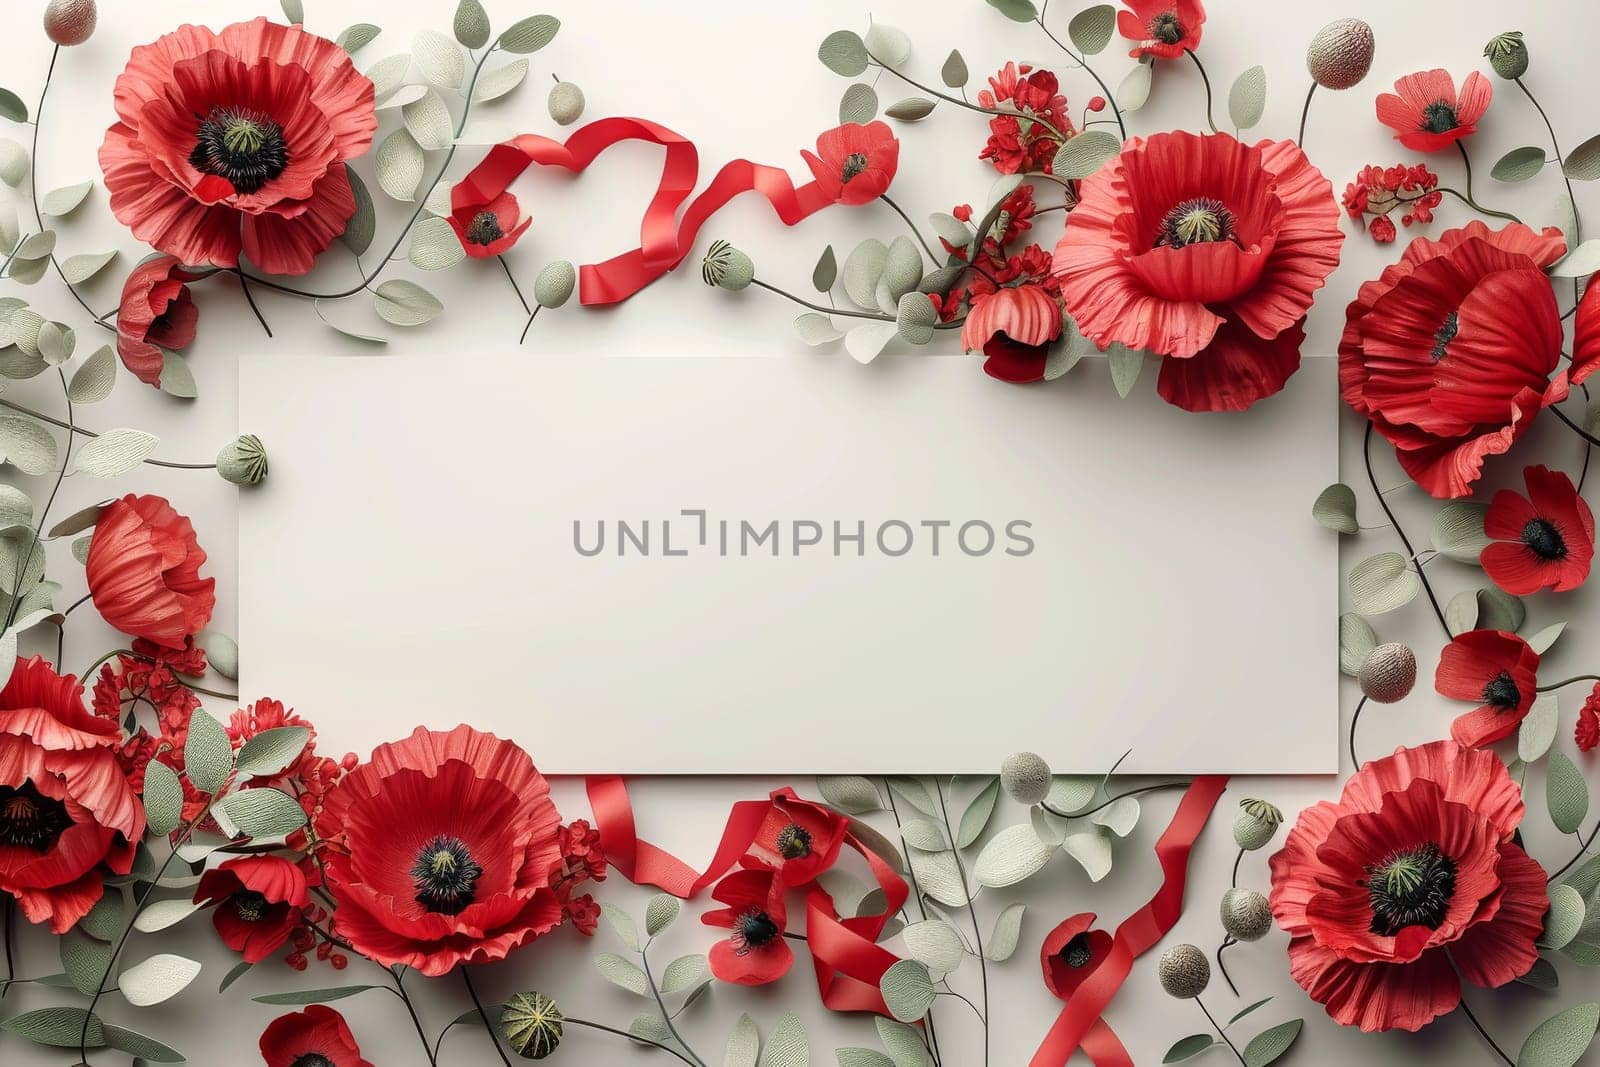 A white sign is surrounded by red flowers. The flowers are arranged in a way that they are overlapping the sign, creating a sense of depth and dimension. Scene is one of warmth and beauty